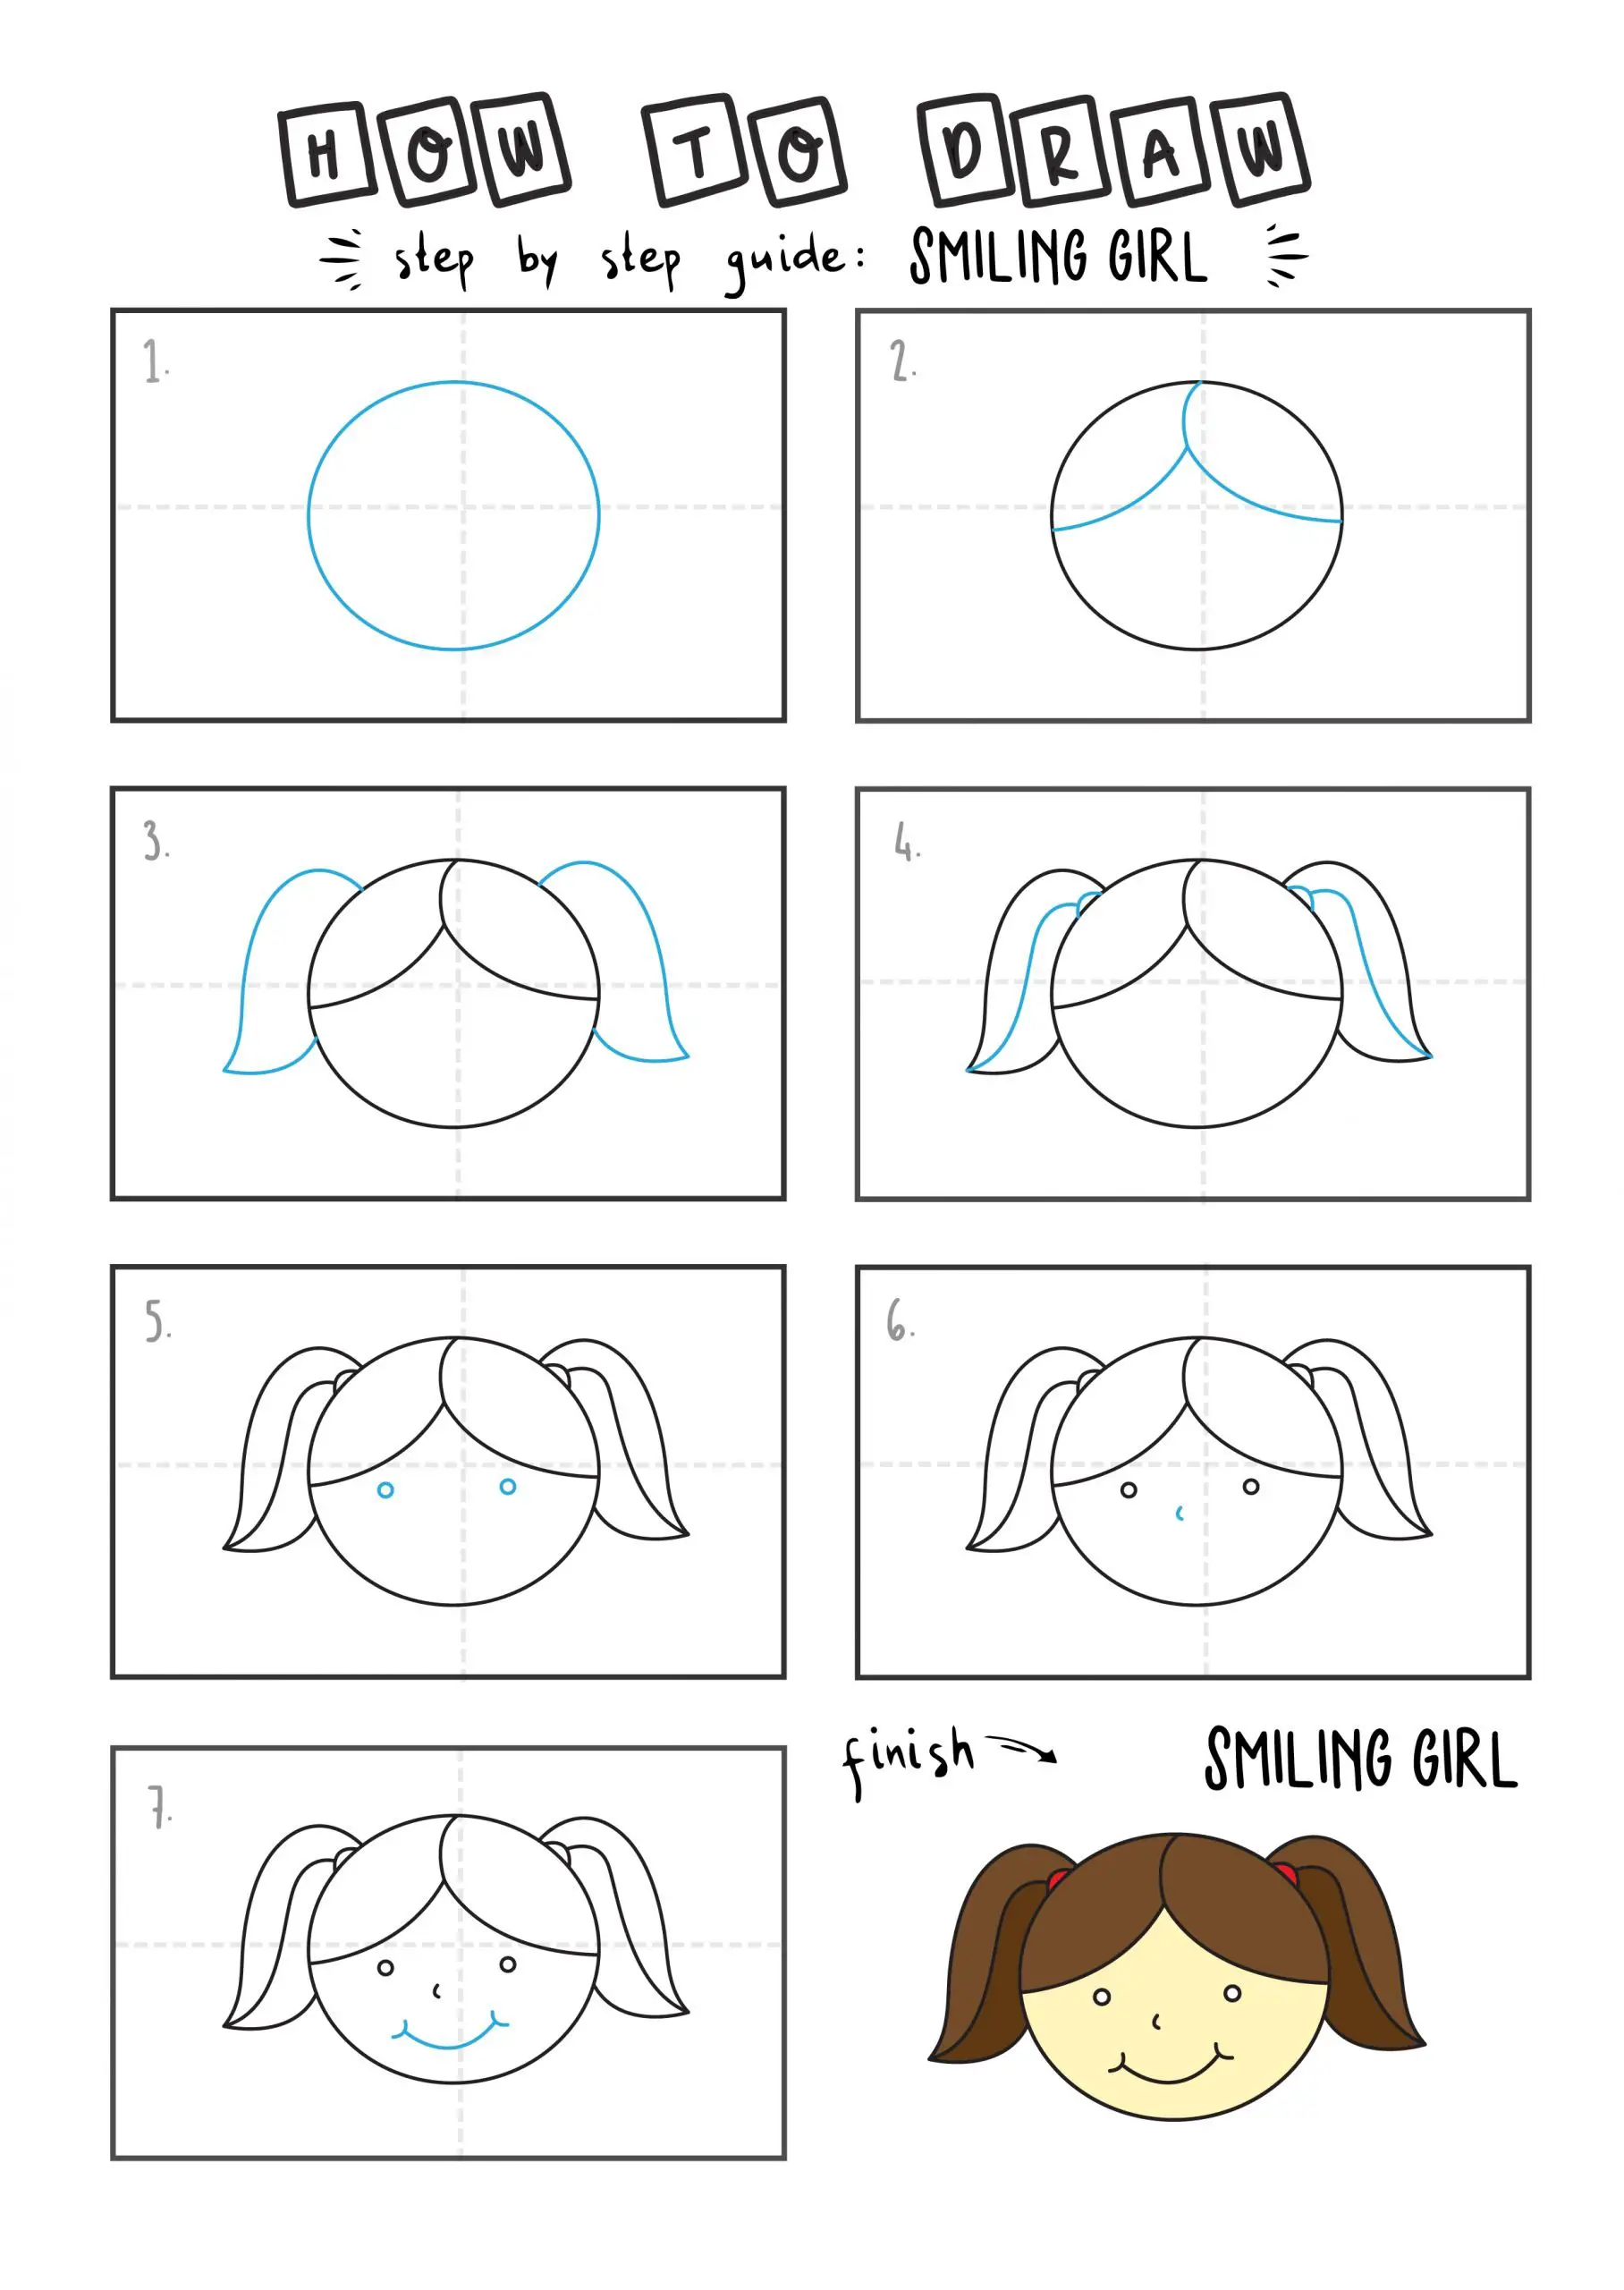 How to draw a smiling girl arts tutorial step by step for kids